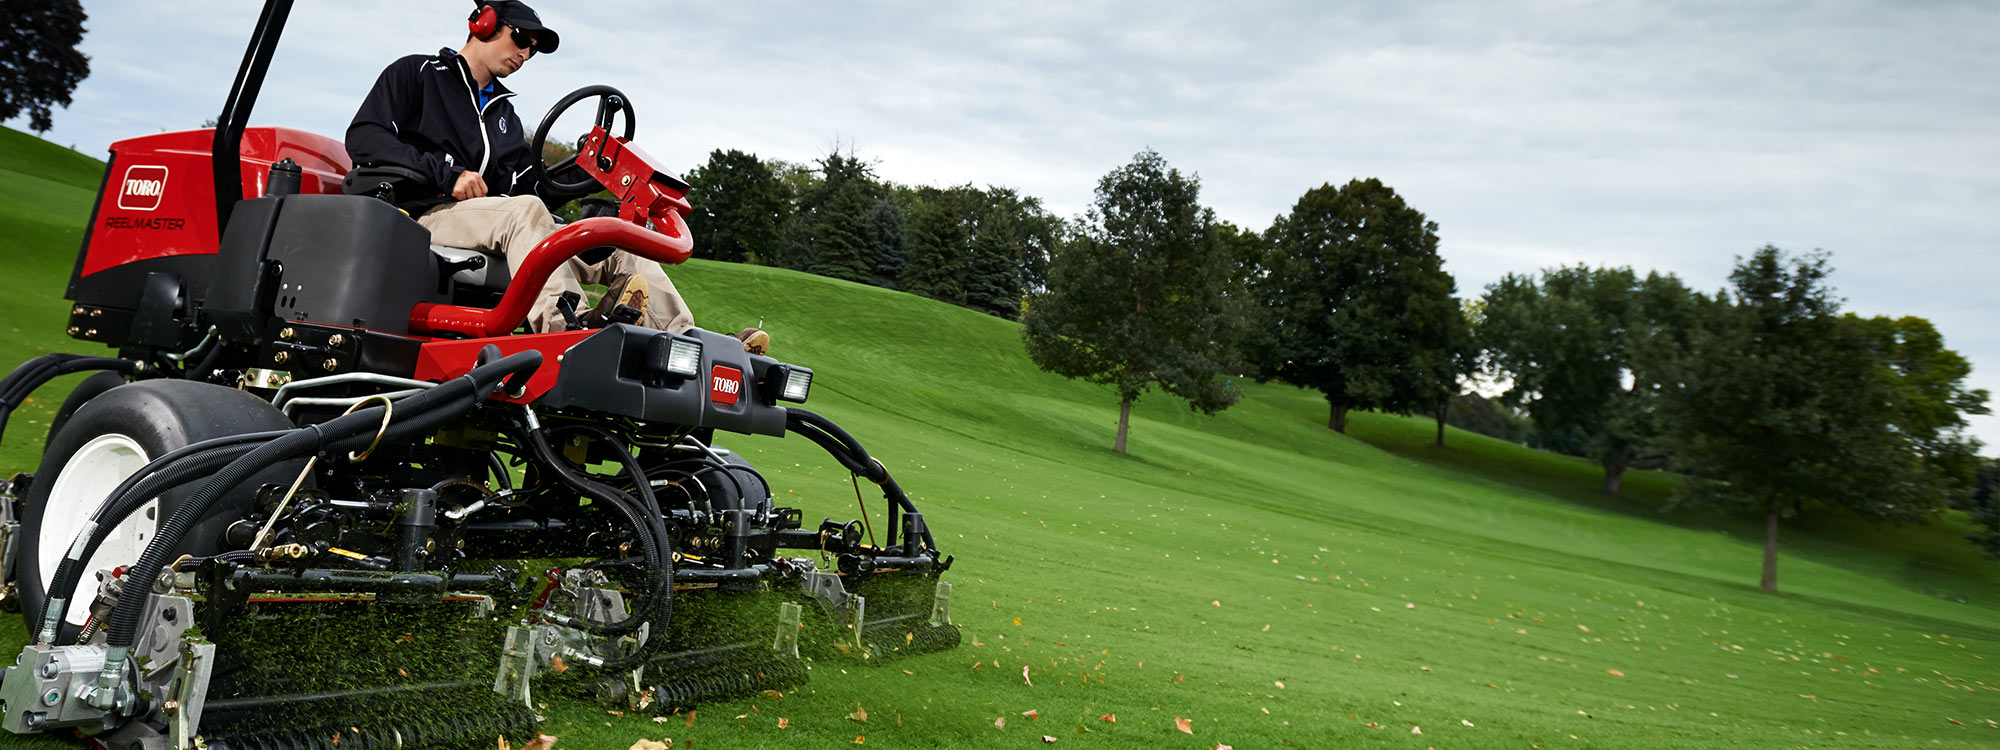 Stay Up to Date With Toro Reel Maintenance Tips - Toro Advantage